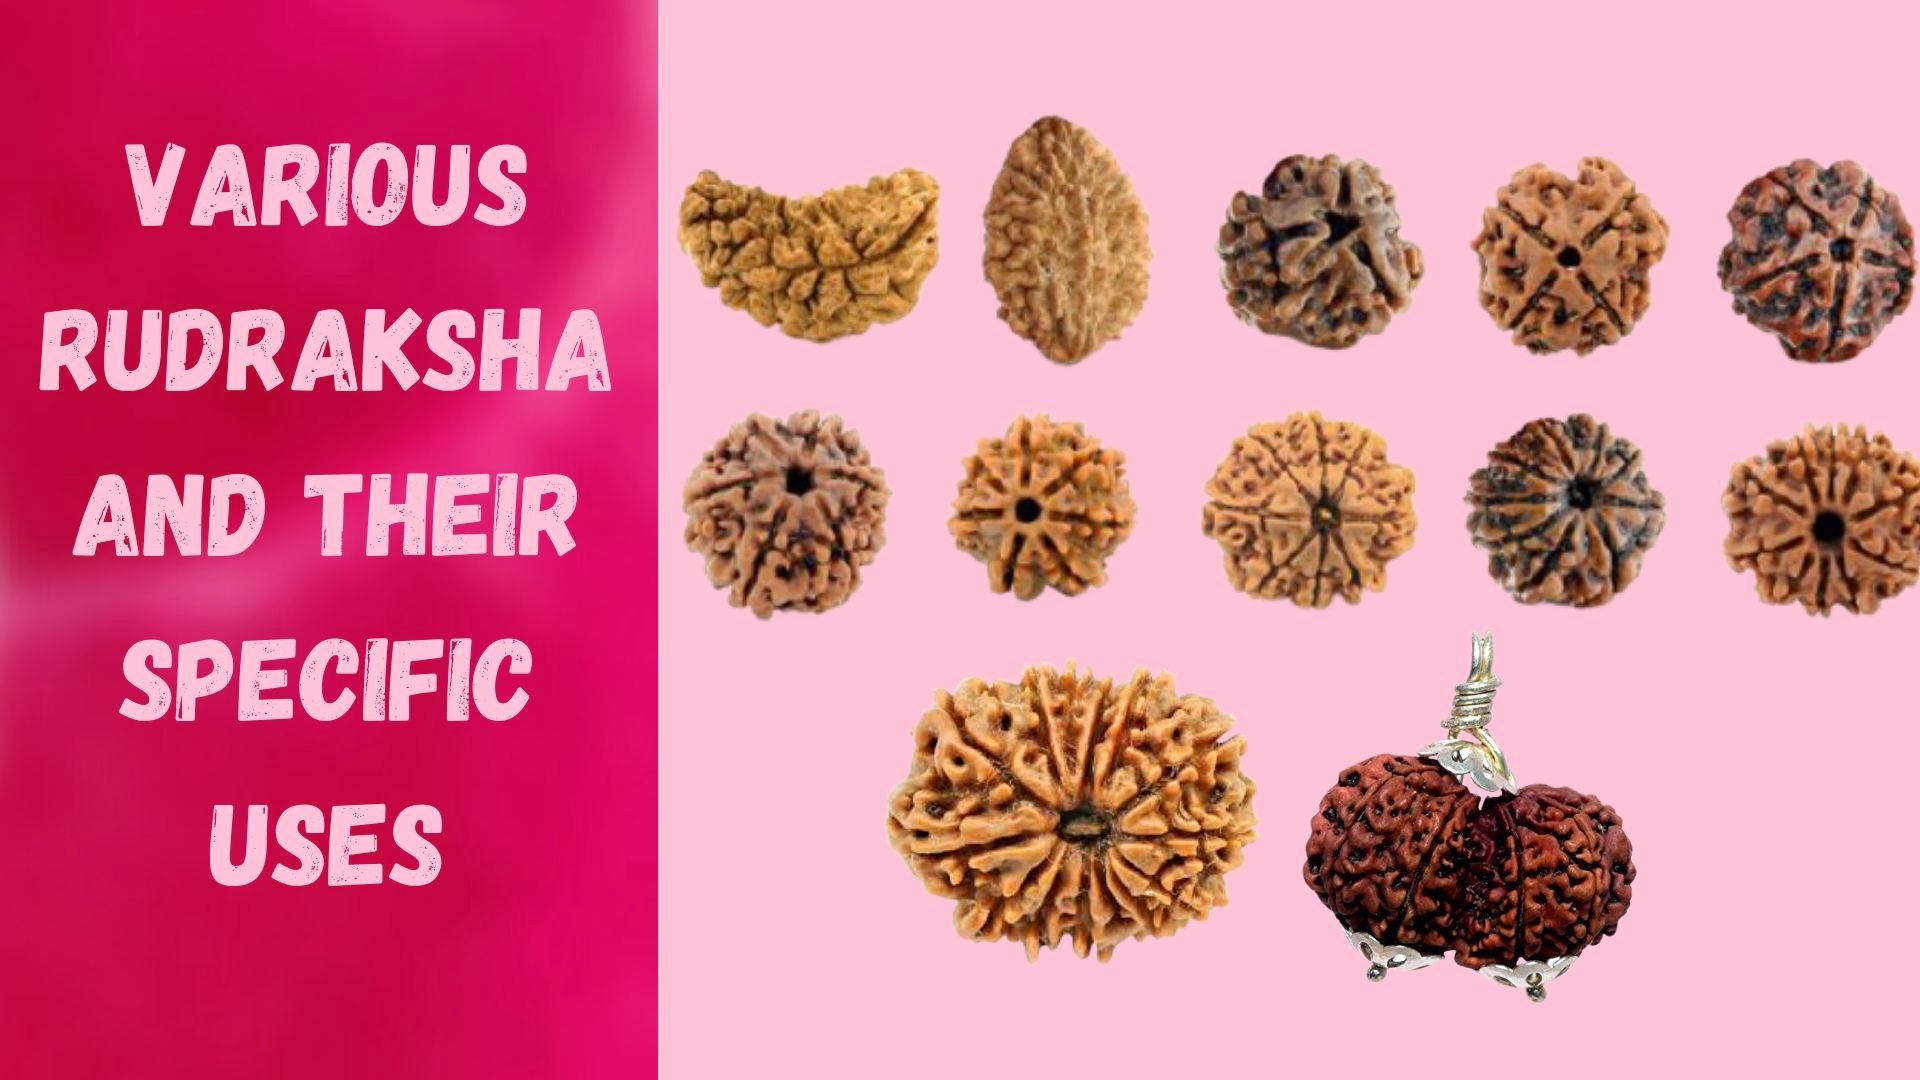 VARIOUS RUDRAKSHA AND THEIR SPECIFIC USES